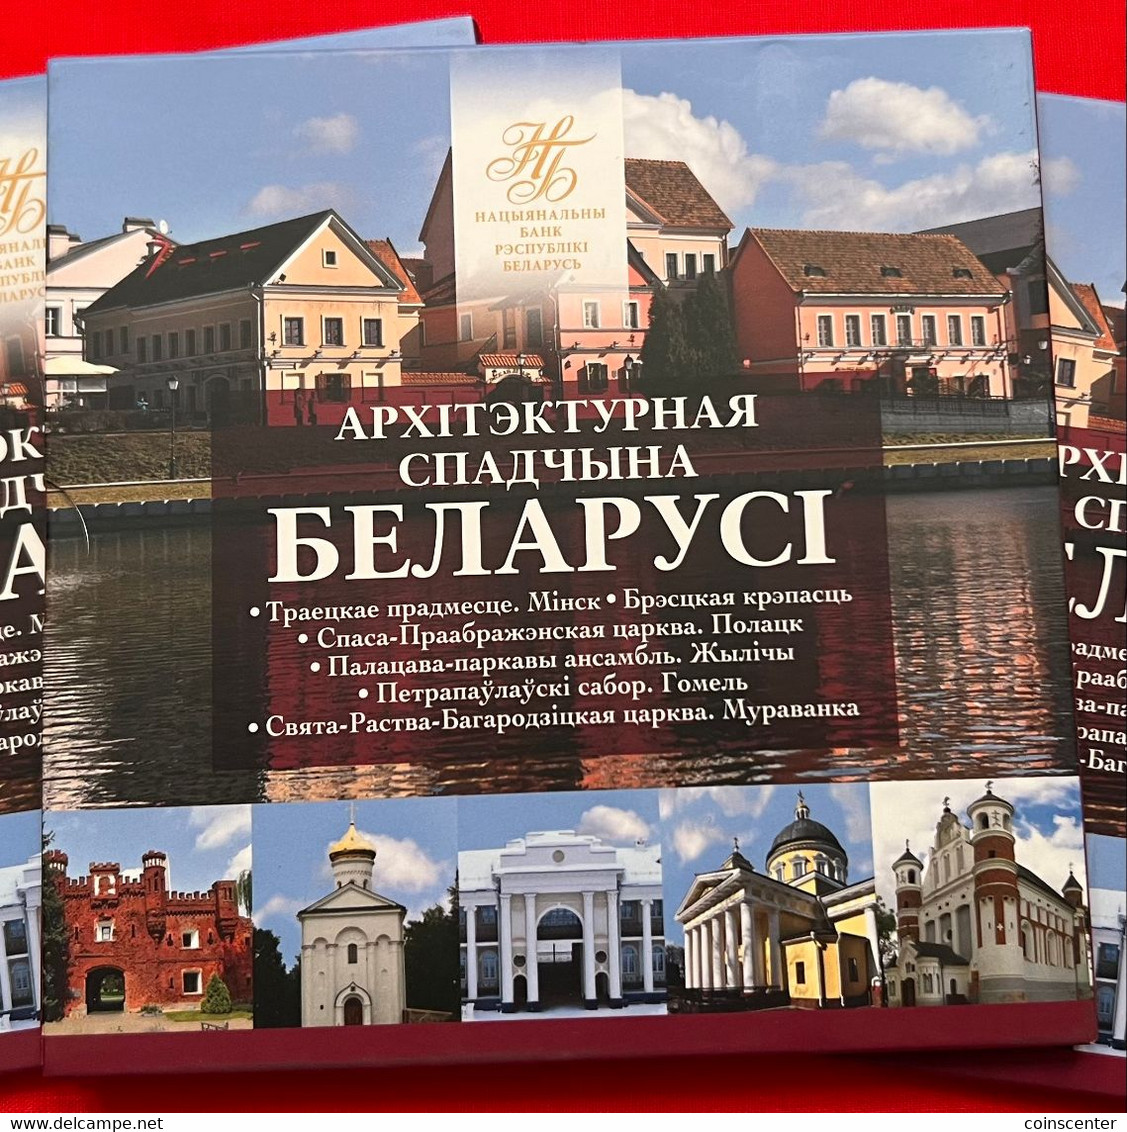 Belarus Set Of 6 Coins: 2 Roubles 2019 "Architectural Heritage" BU - Bielorussia